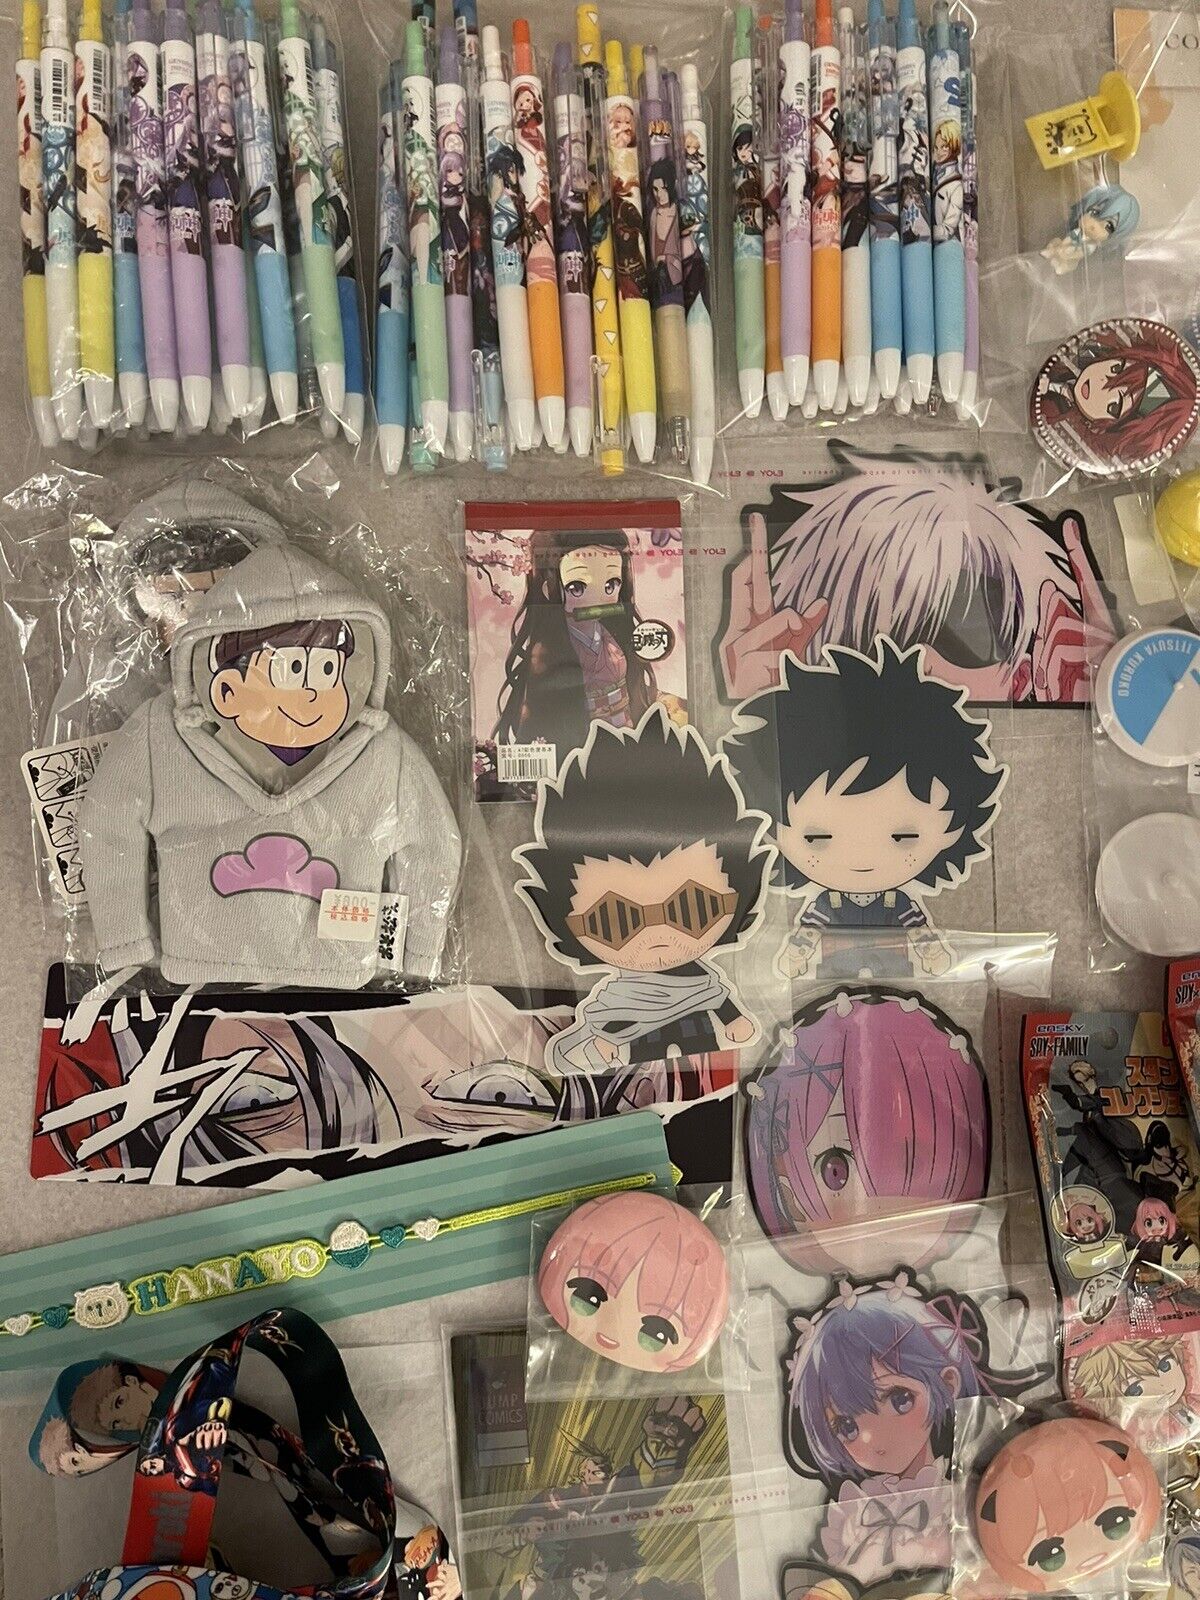 New Anime Keychain, Pens, Stickers, Accessories, Mini Cloth Banners, Lanyards